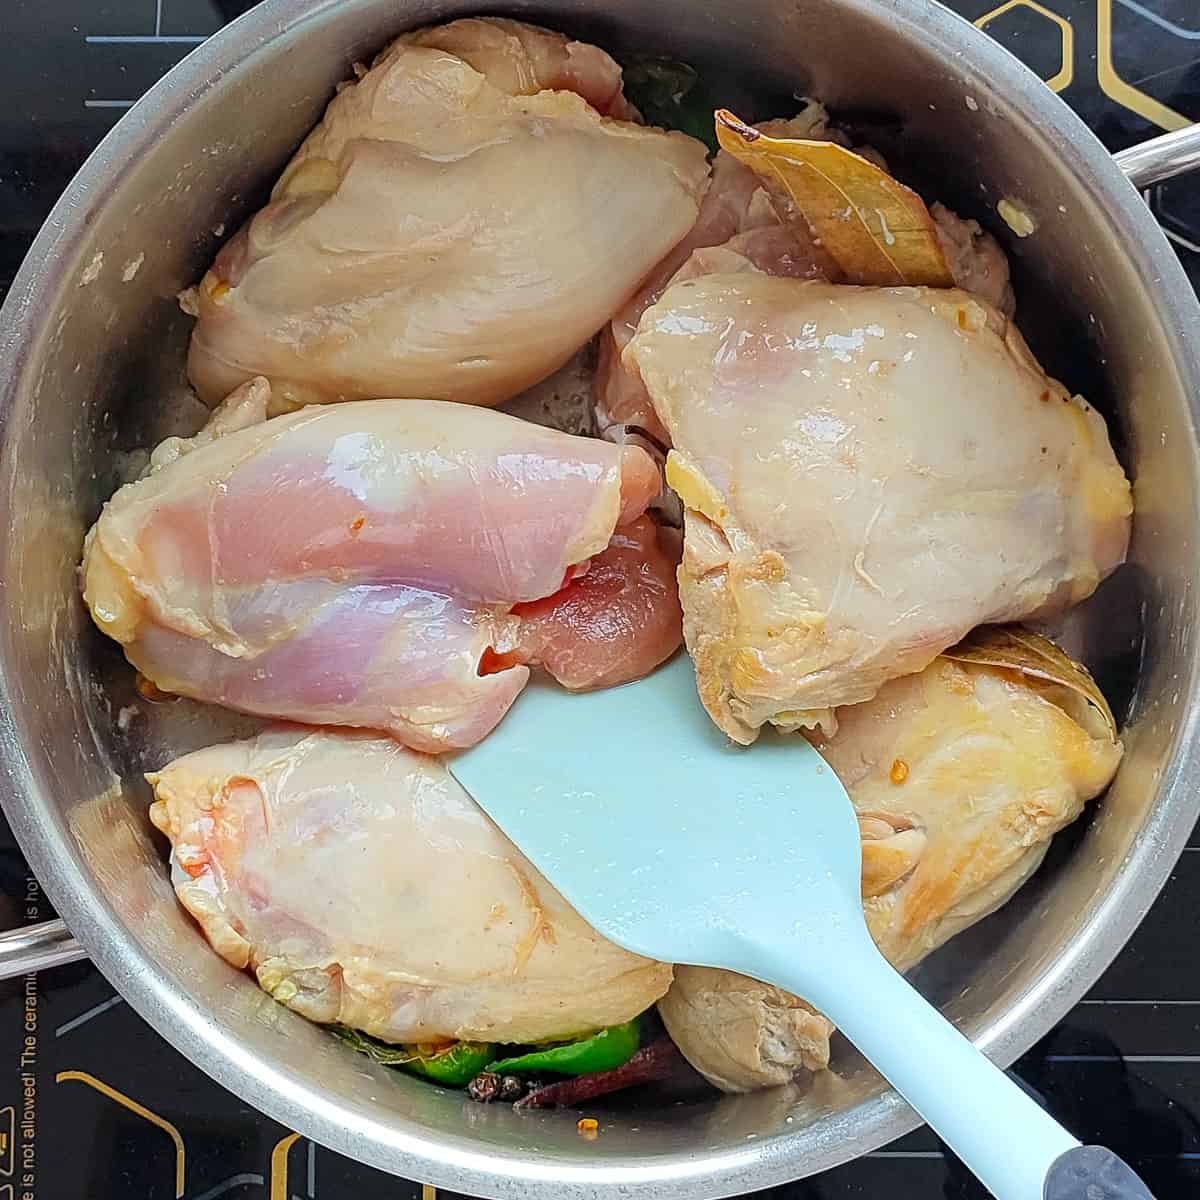 Chicken being sauteed in a metal soup pot for broth.